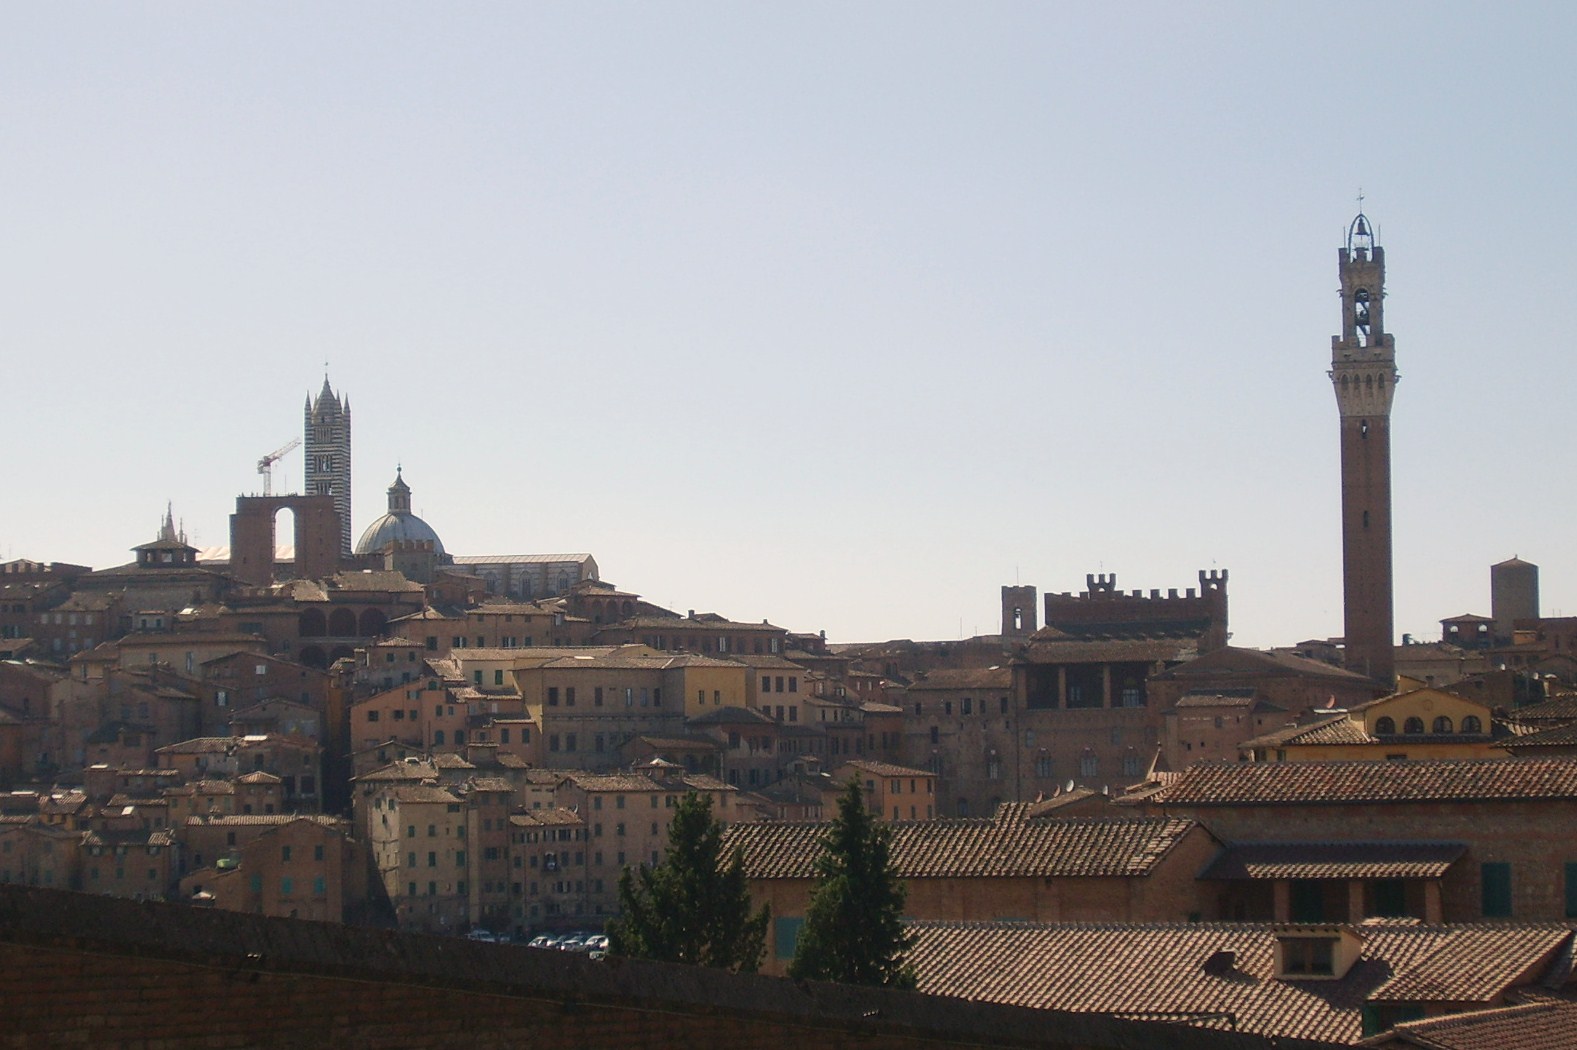 [The+Siena+skyline+from+the+steps+of+Santa+Maria+Servi,+panaroma+and+duomo+to+the+left,+the+tower+in+the+camp+to+the+right.JPG]